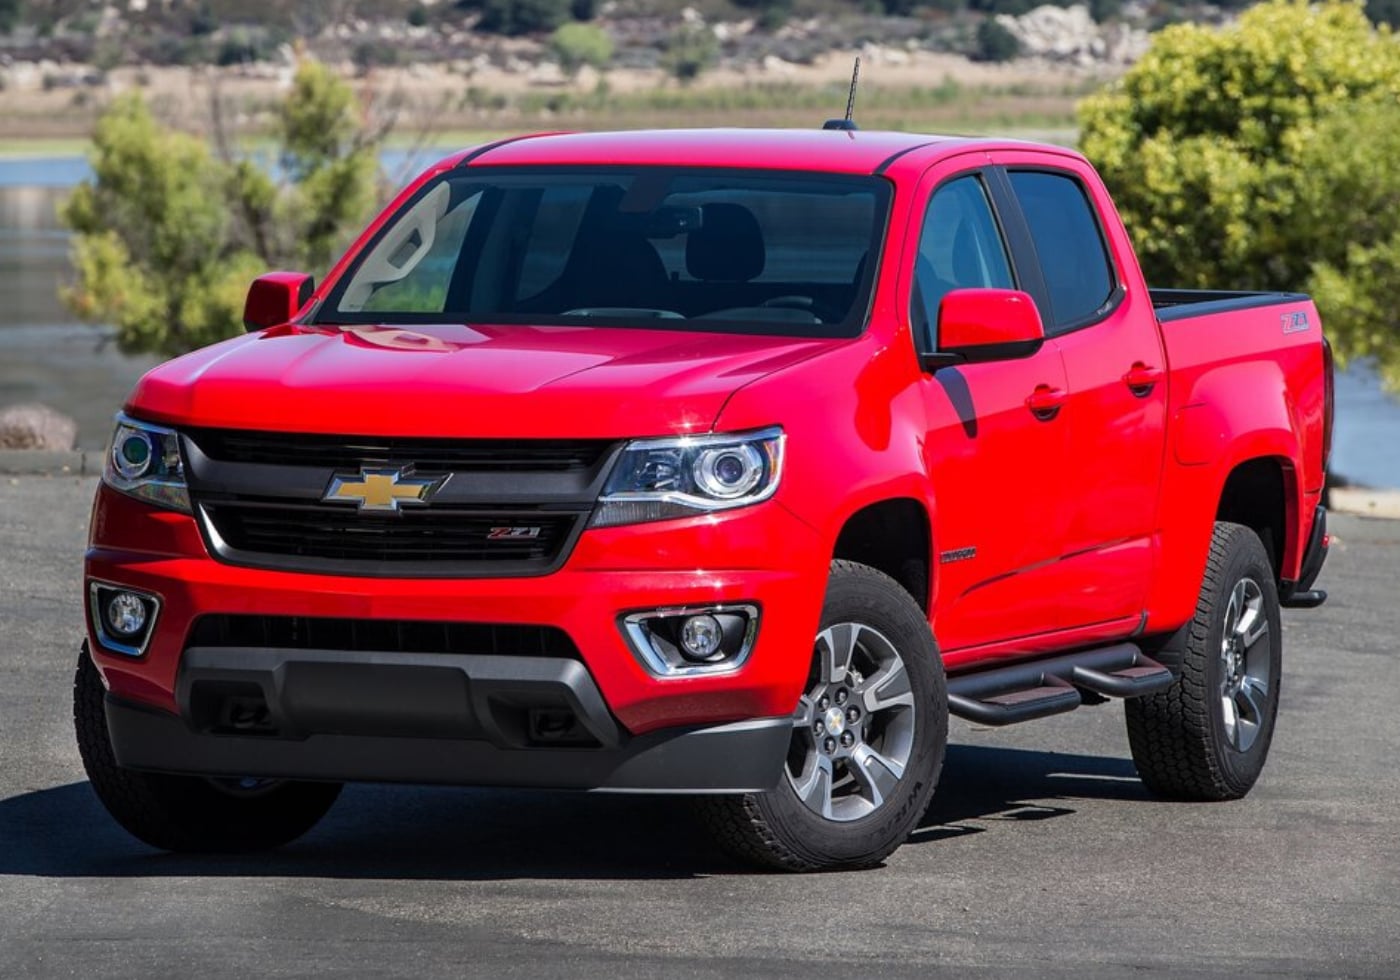 Red 2016 Chevrolet Colorado parked on an asphalt parking lot overlooking a lake